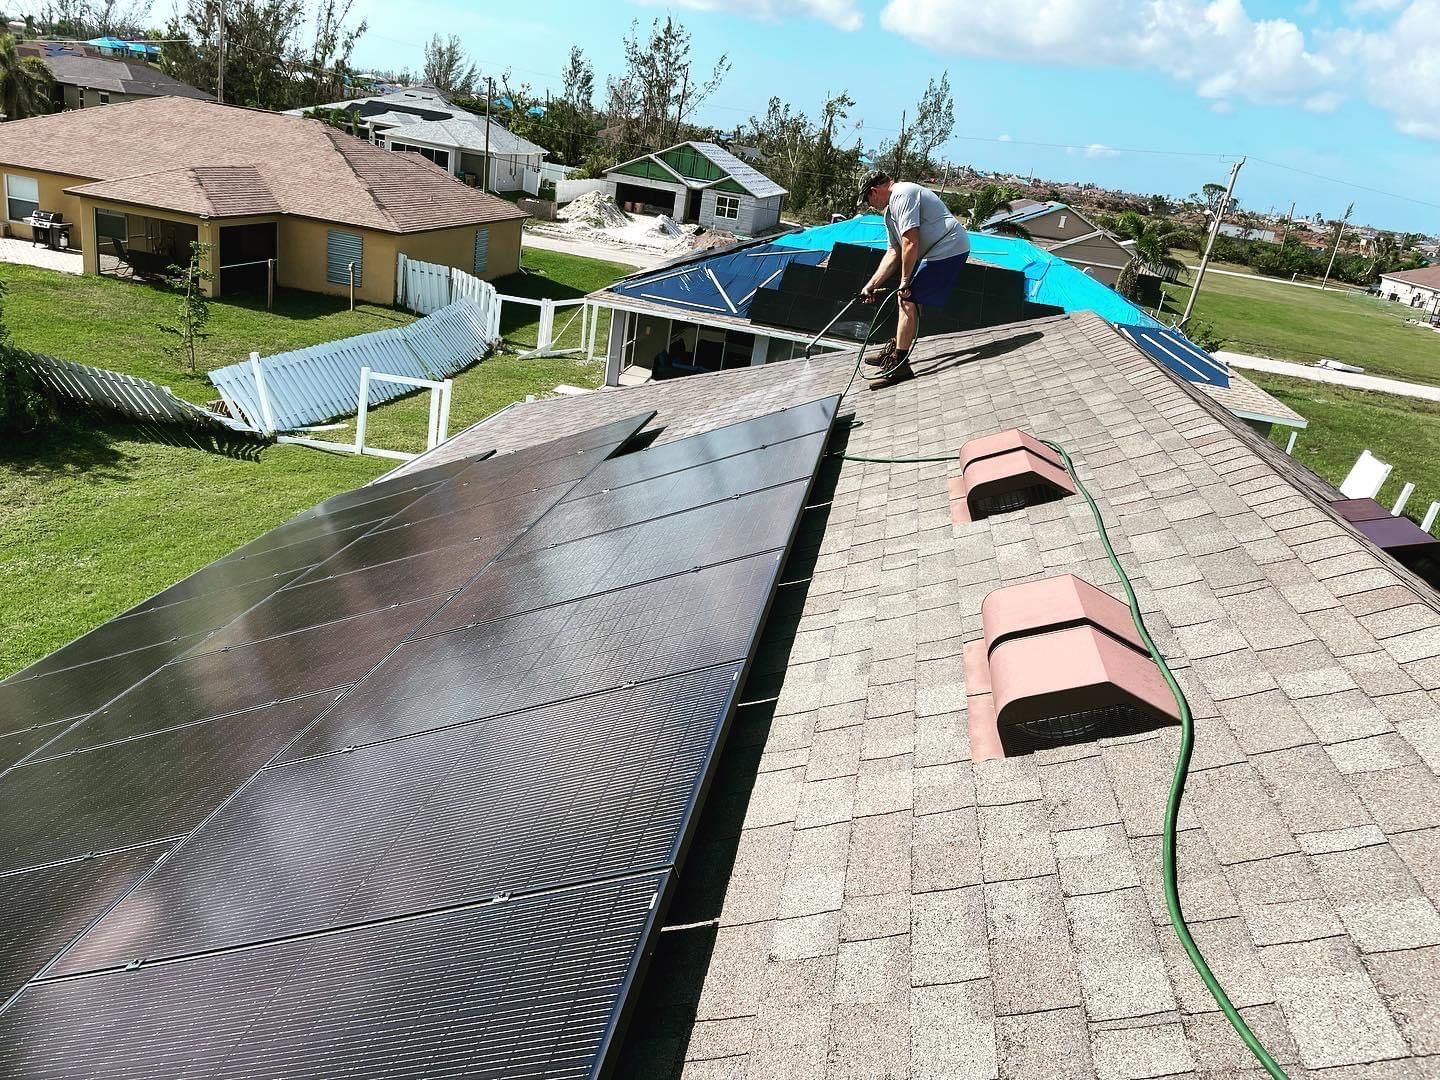 A man is working on the roof of a house with solar panels.